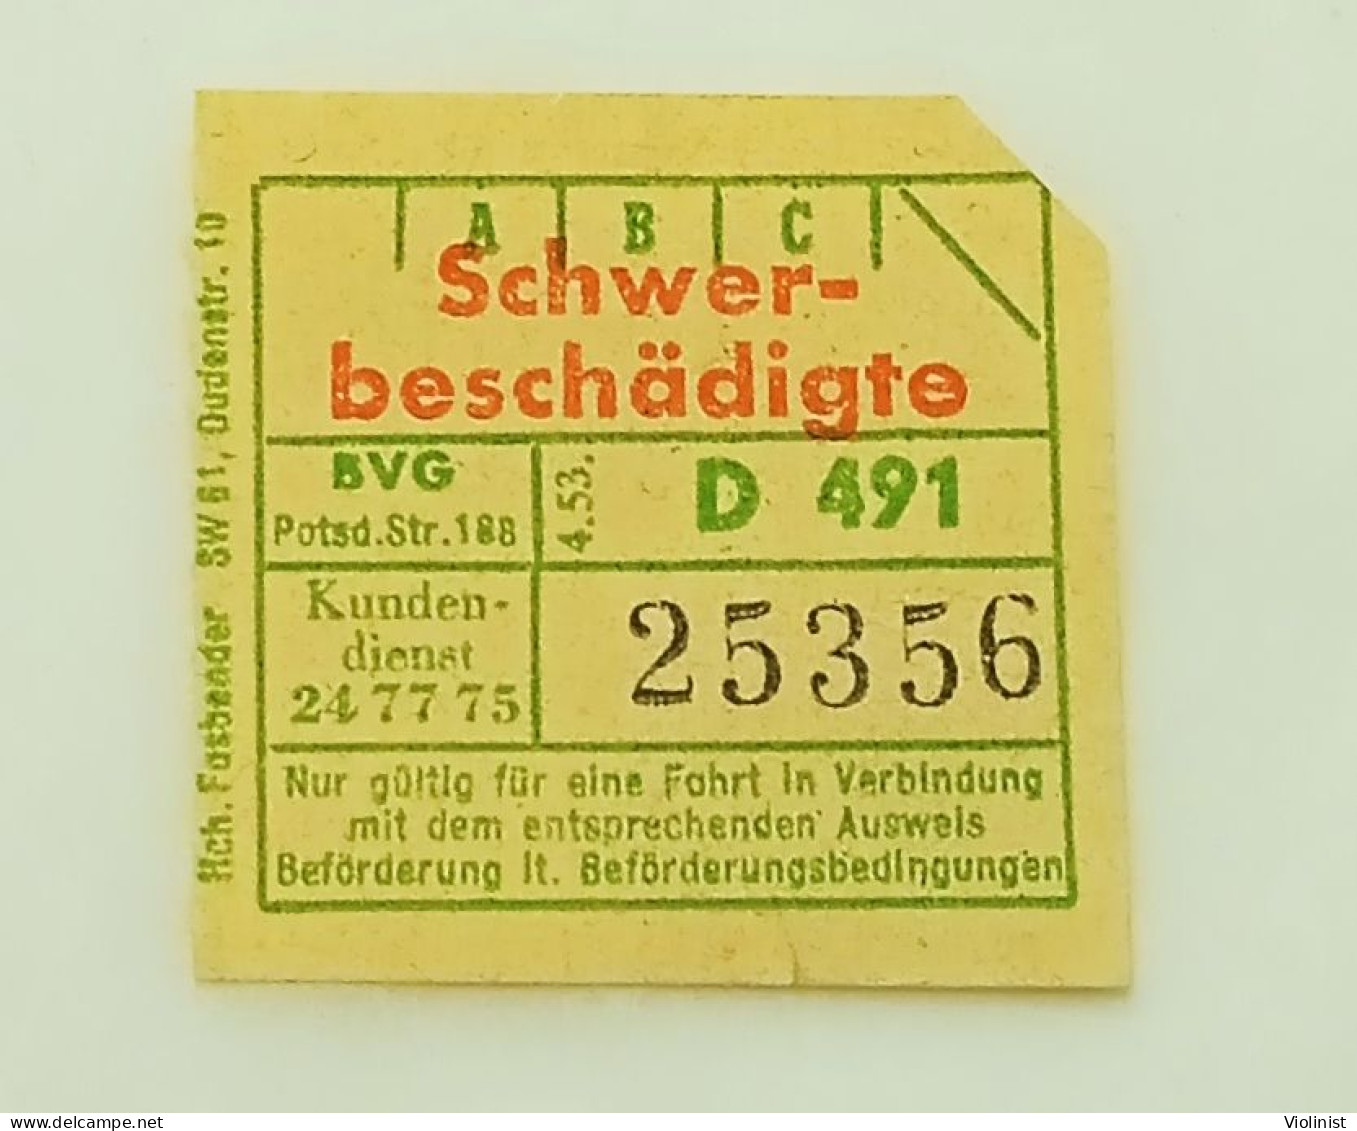 Germany-Berlin-BVG-ABC-Schwer-beschädigte-ticket For One Ride Of A Severely Disabled Person-1953. - Europe